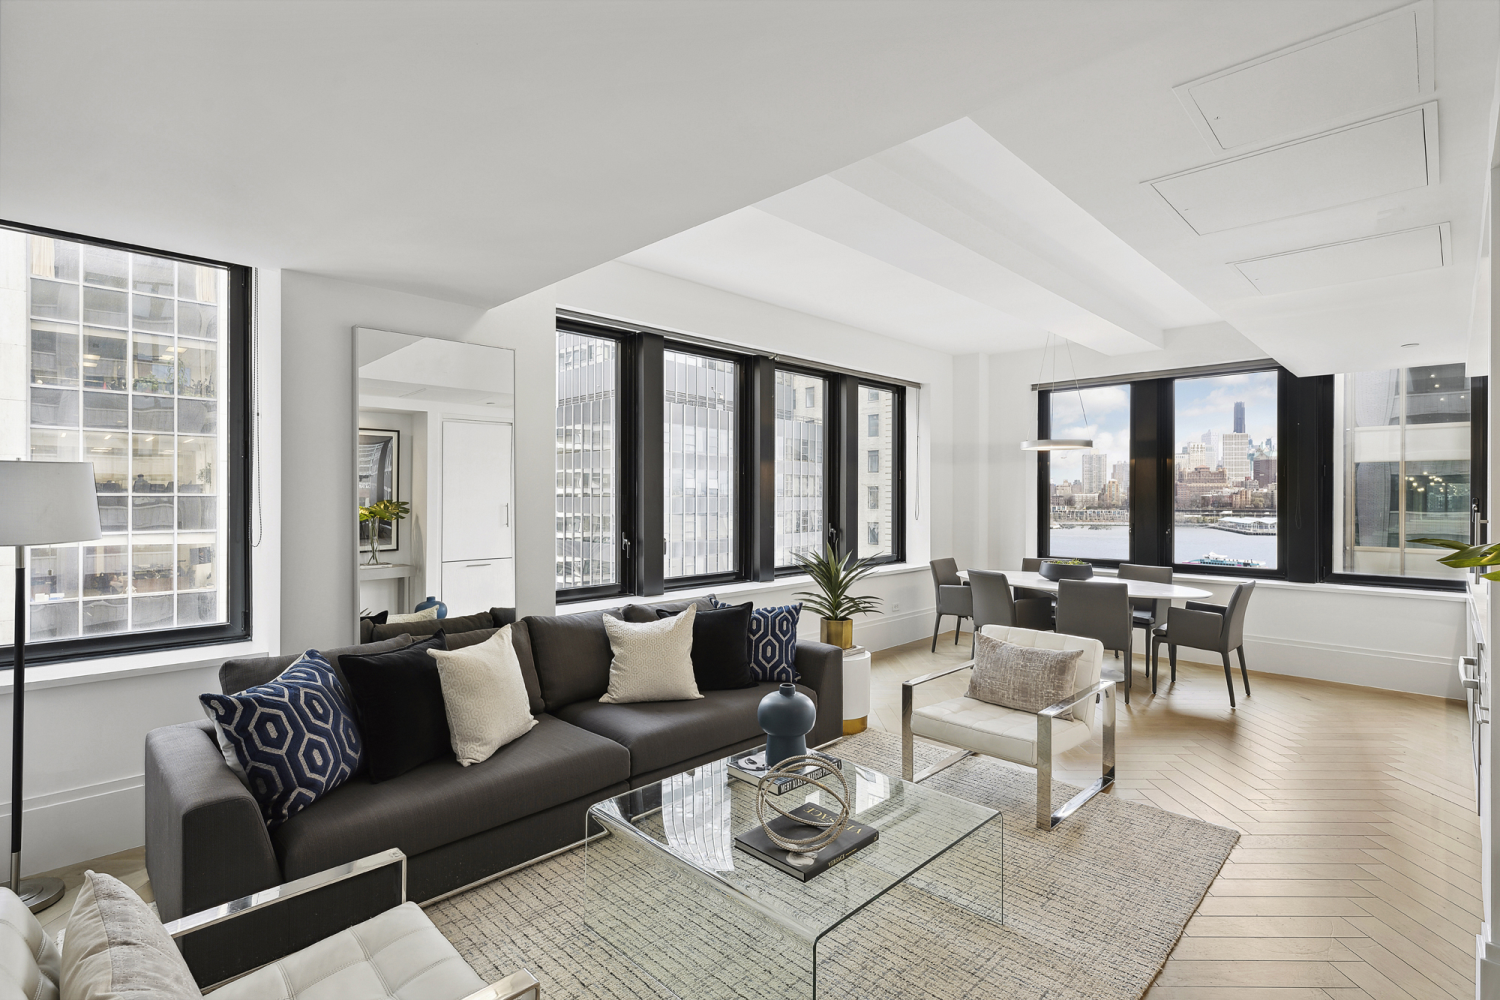 101 Wall Street 11B, Financial District, Downtown, NYC - 2 Bedrooms  
2.5 Bathrooms  
4 Rooms - 